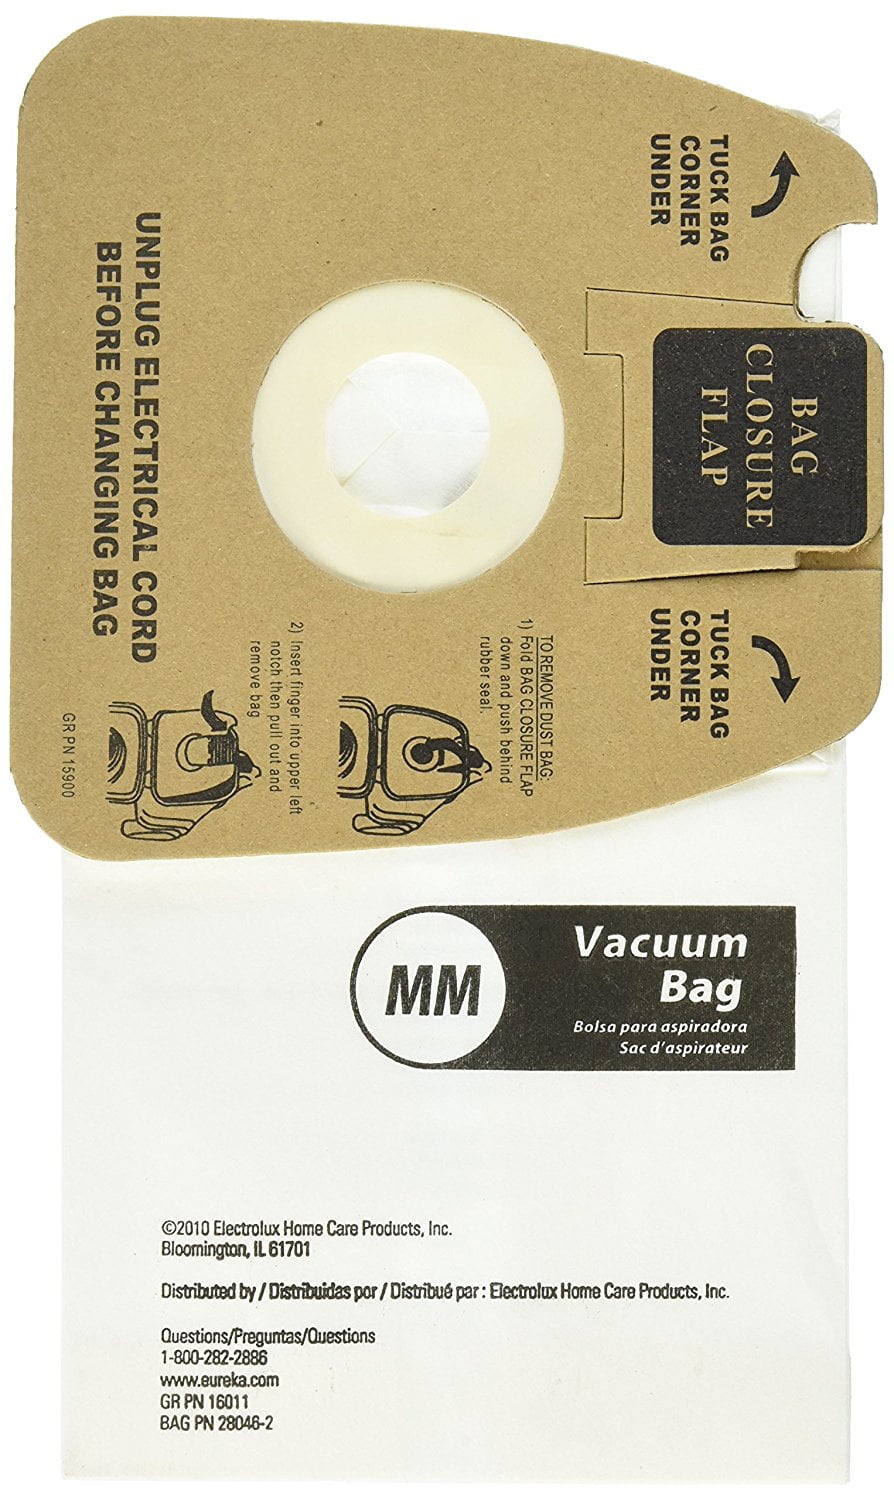 120 Eureka MM Mighty Mite 3670 3680 Canister Vacuum Bags Sanitaire Professional 